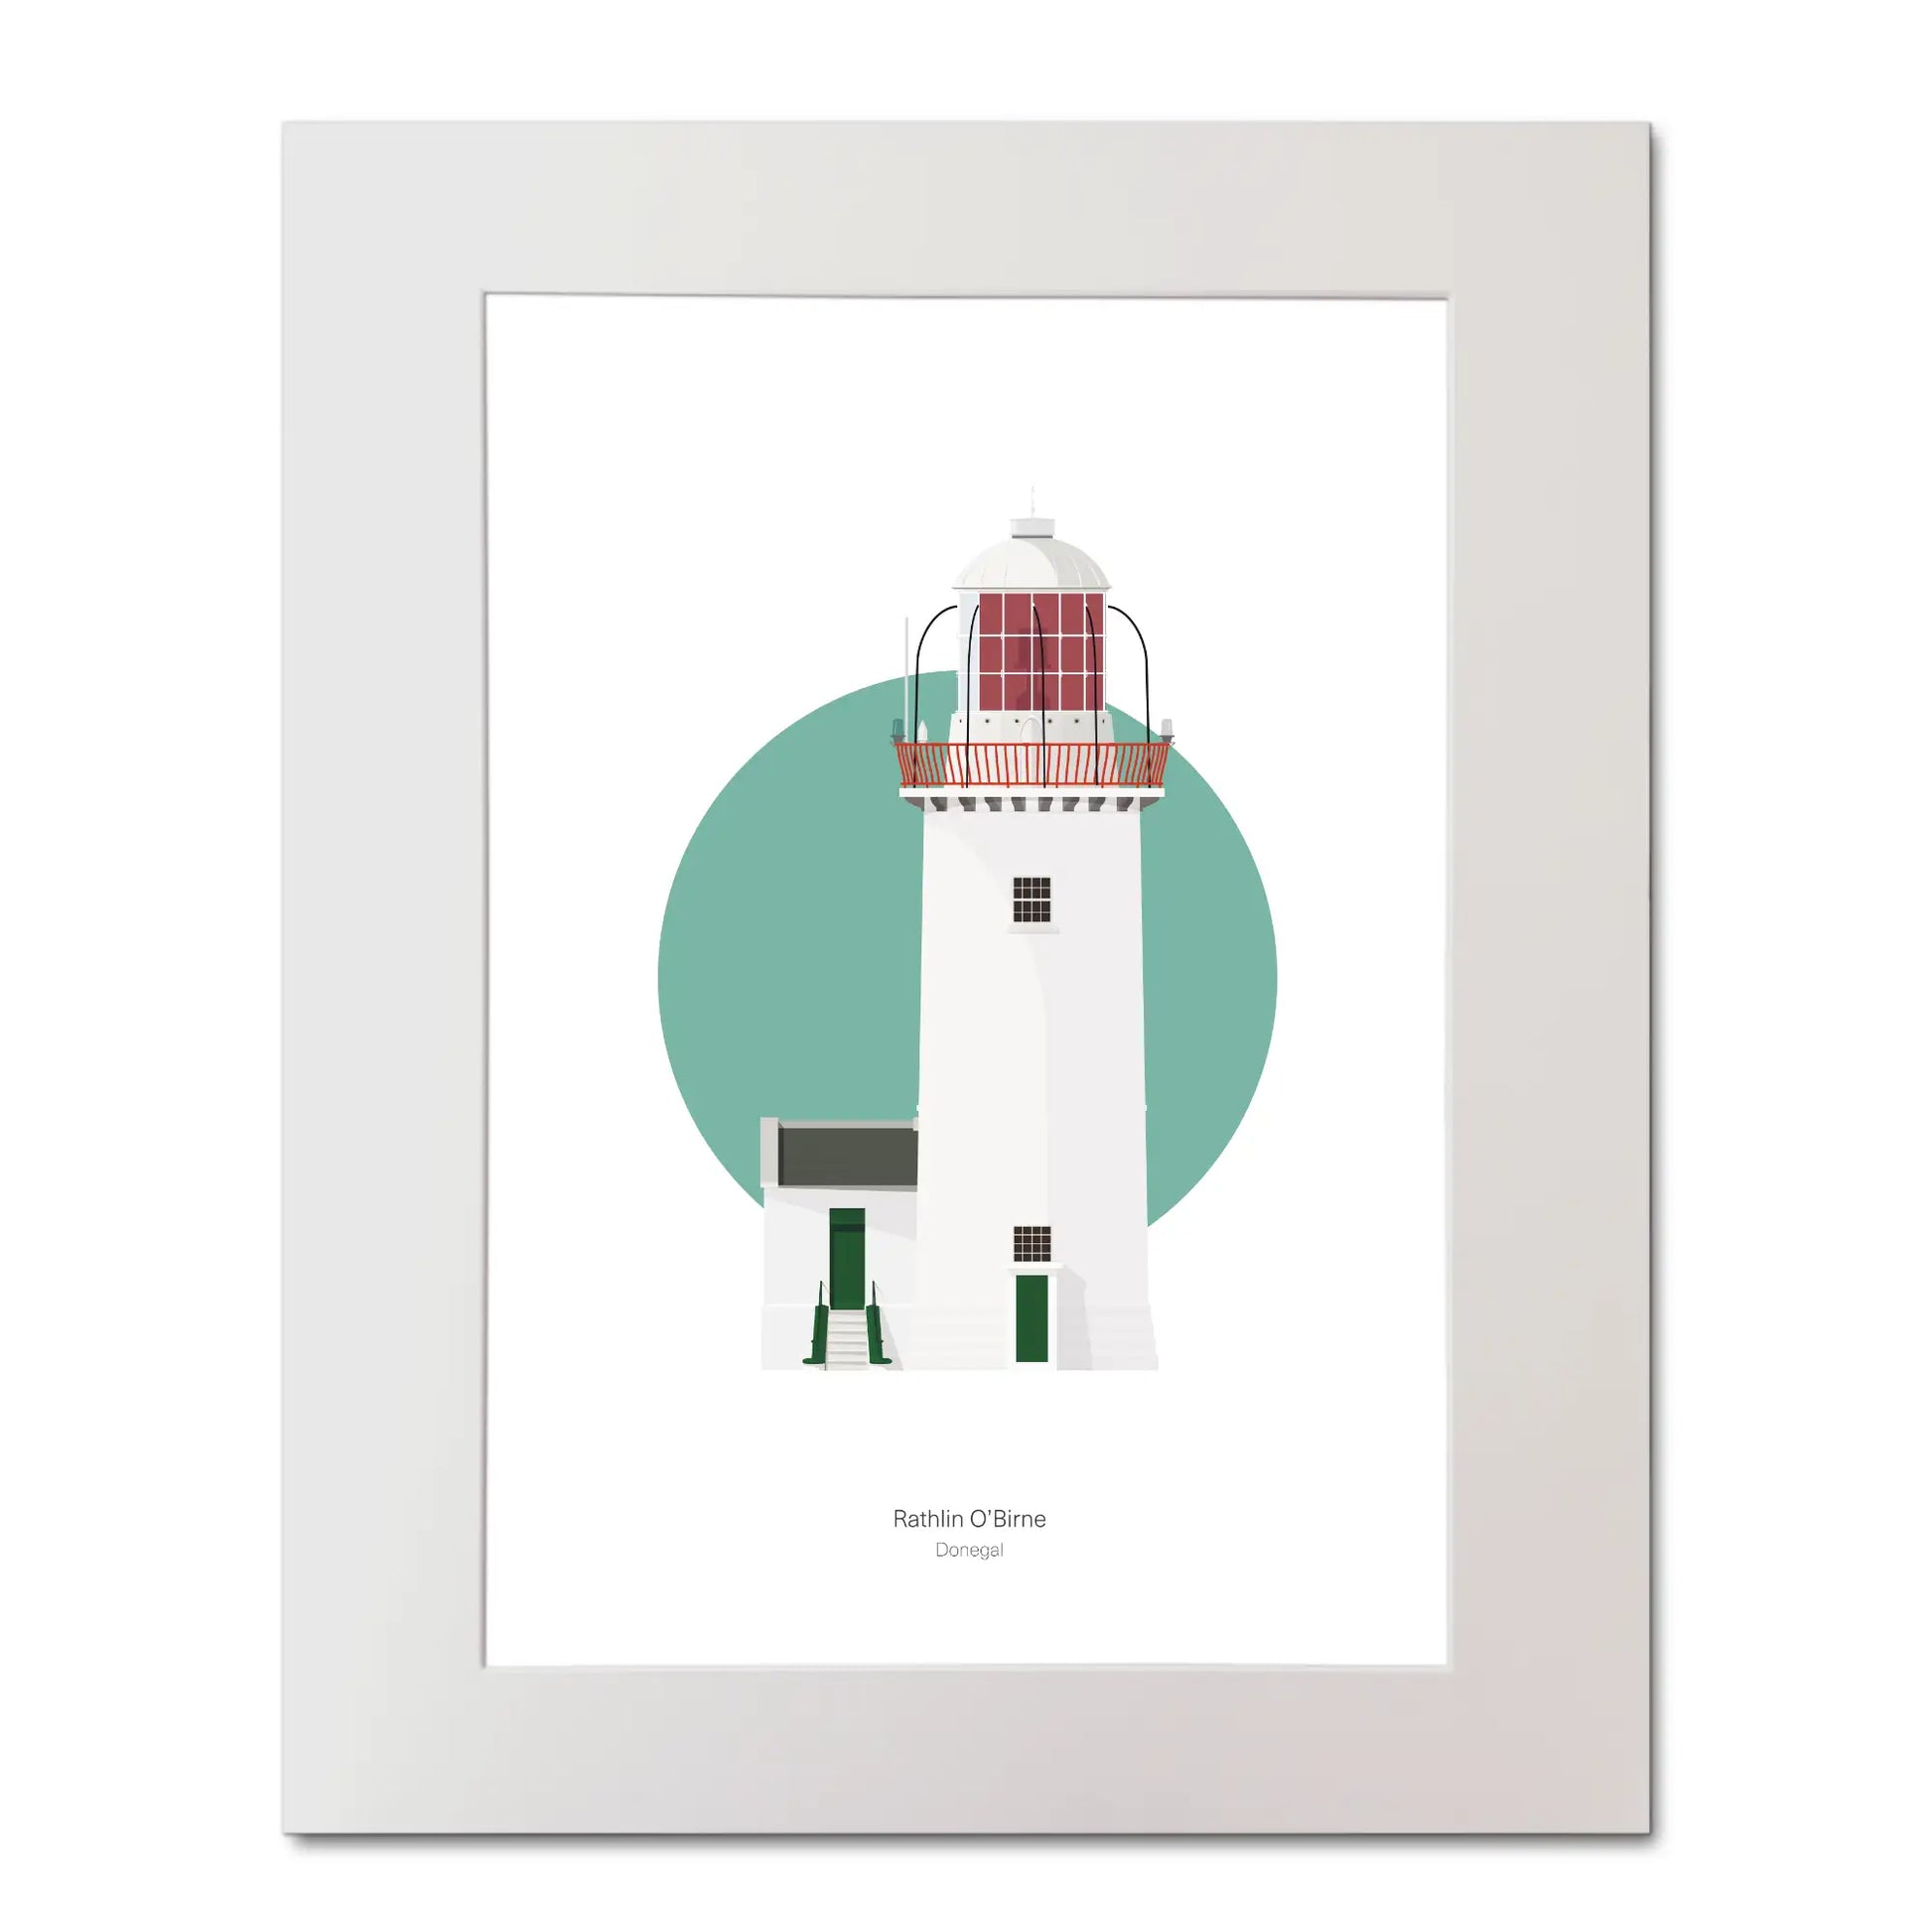 Contemporary illustration of Rathlin O’Birne lighthouse on a white background inside light blue square, mounted and measuring 40x50cm.